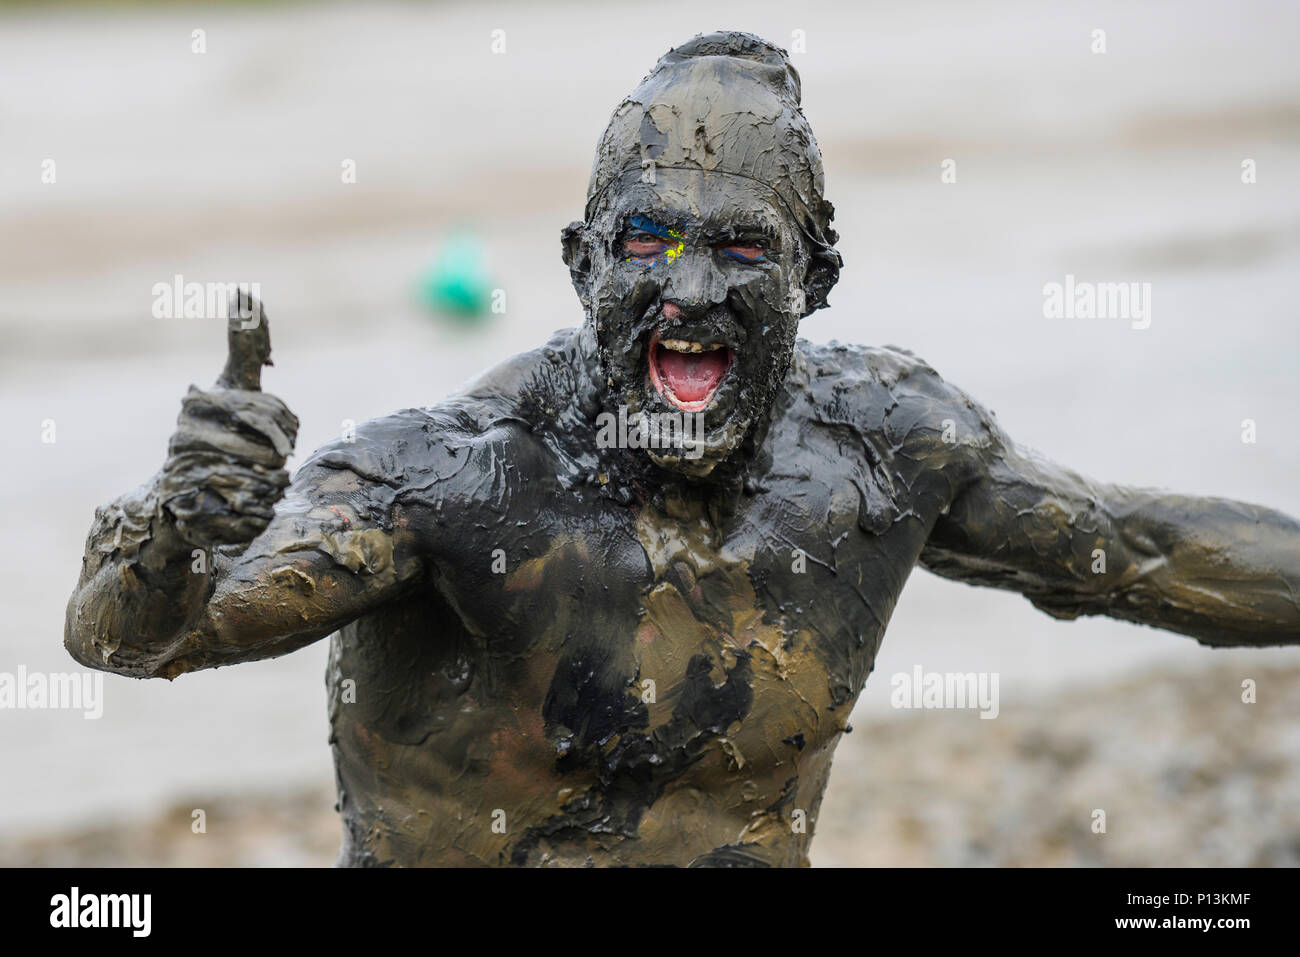 Maldon Mud Race. Joel Hicks, competitor, covered in the slimy mud of ...